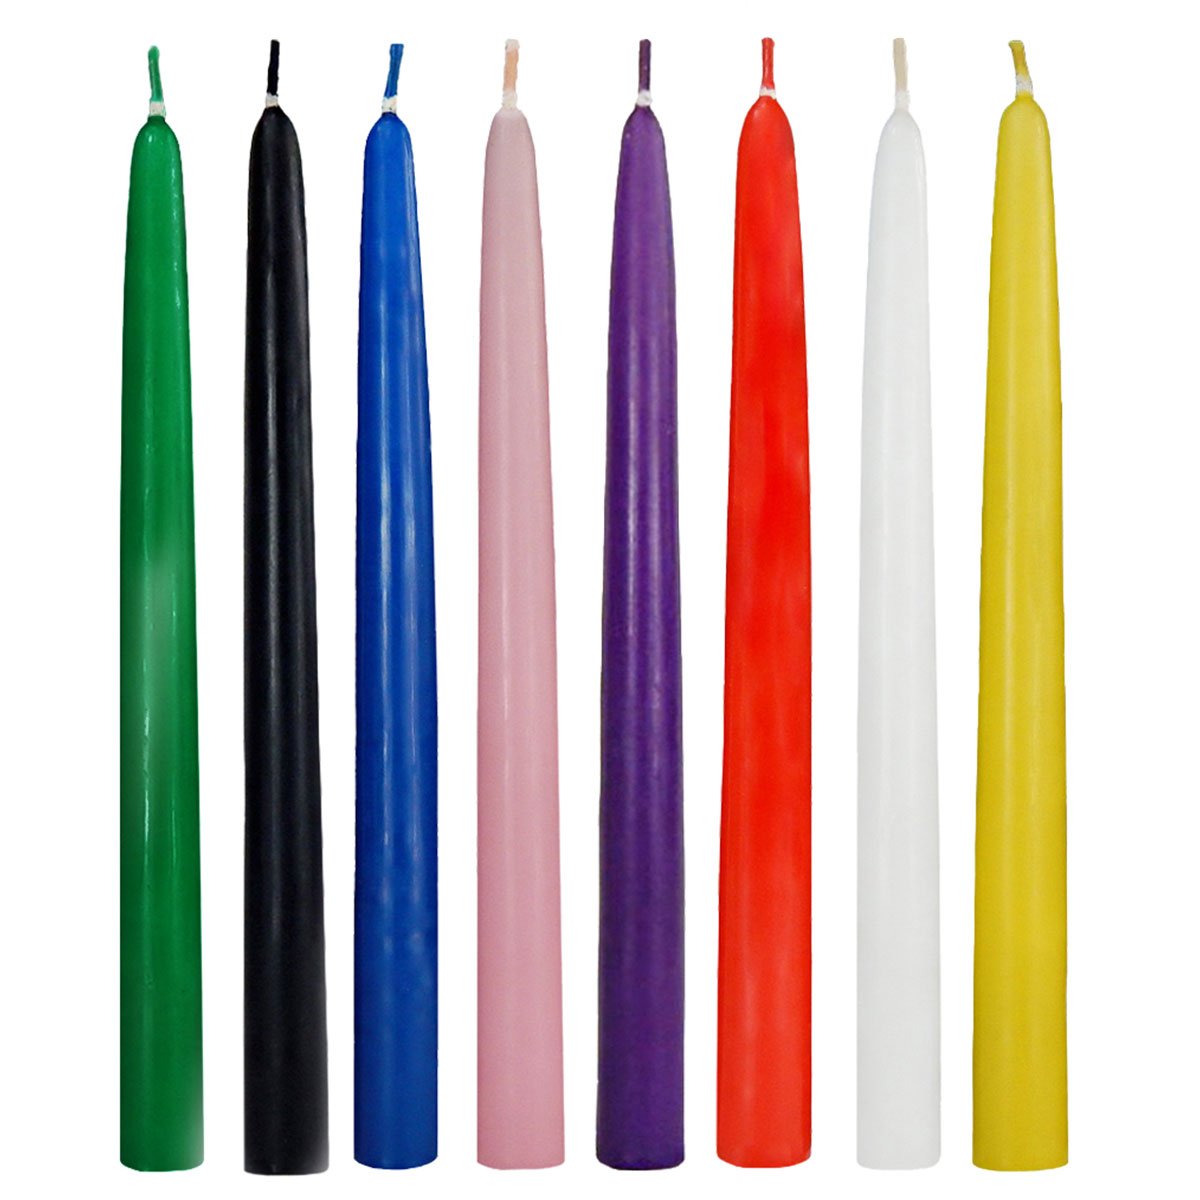 12 inch Taper Candles made in the USA